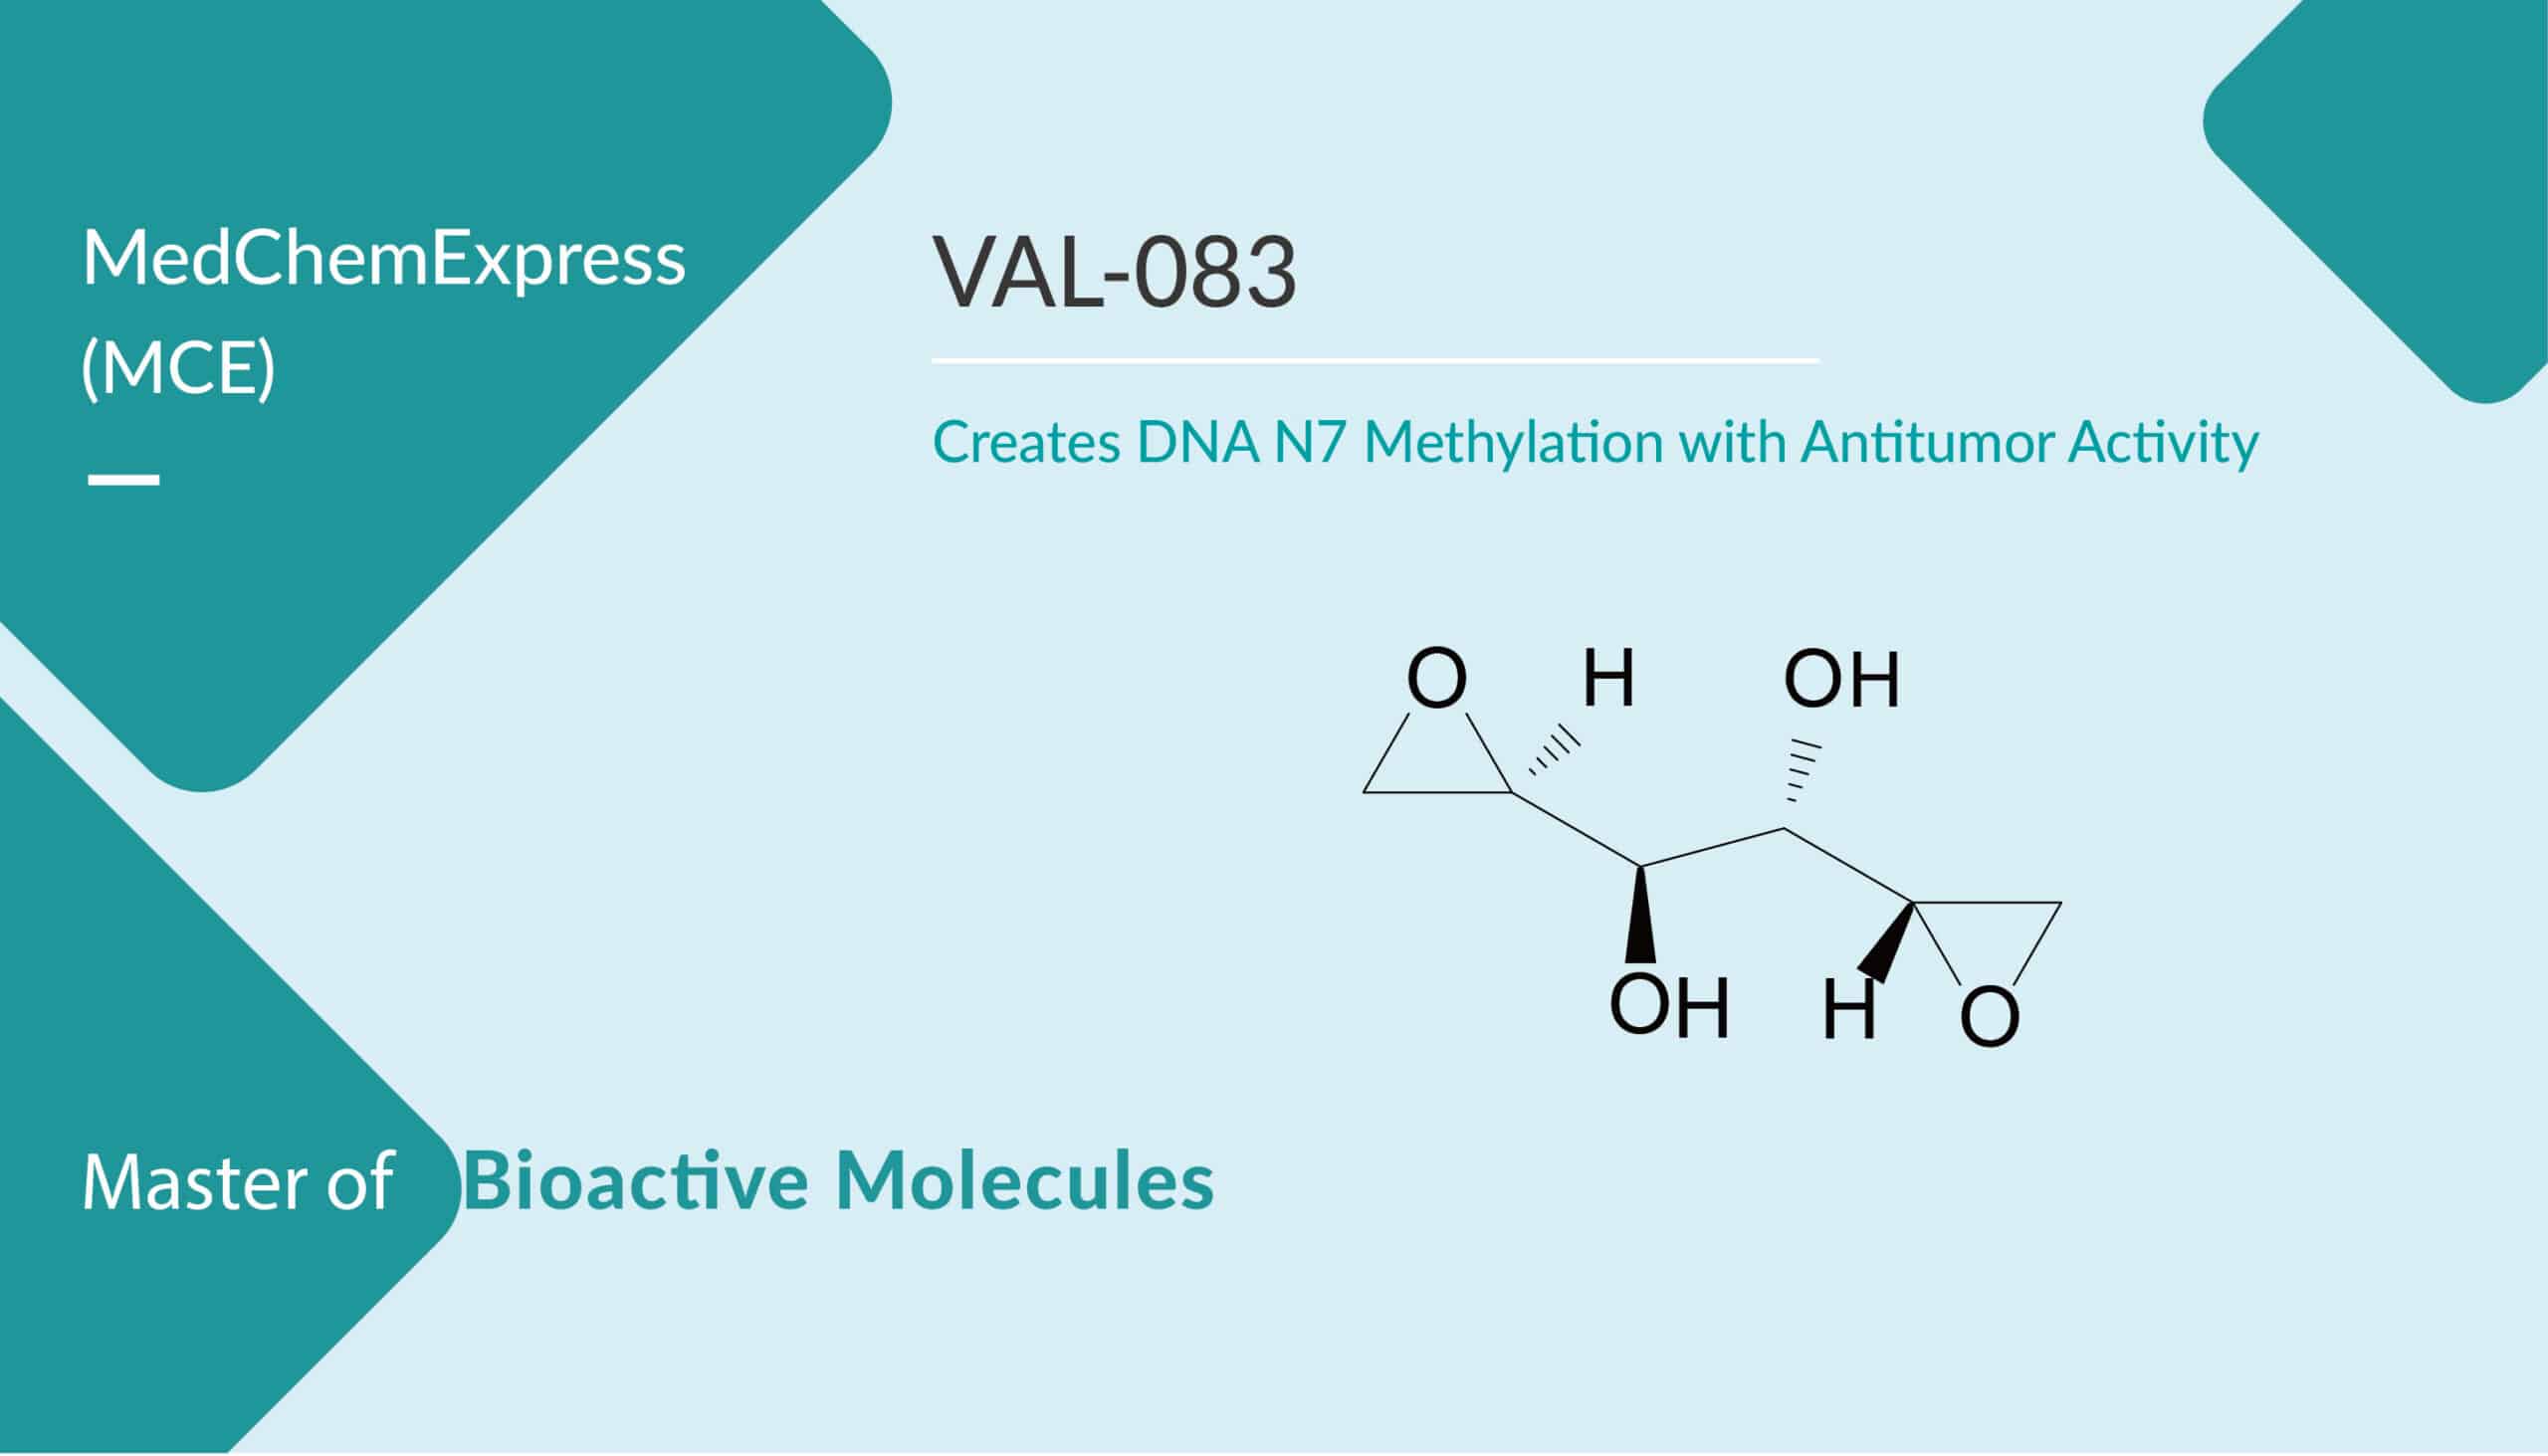 VAL-083 Creates DNA N7 Methylation with Antitumor Activity